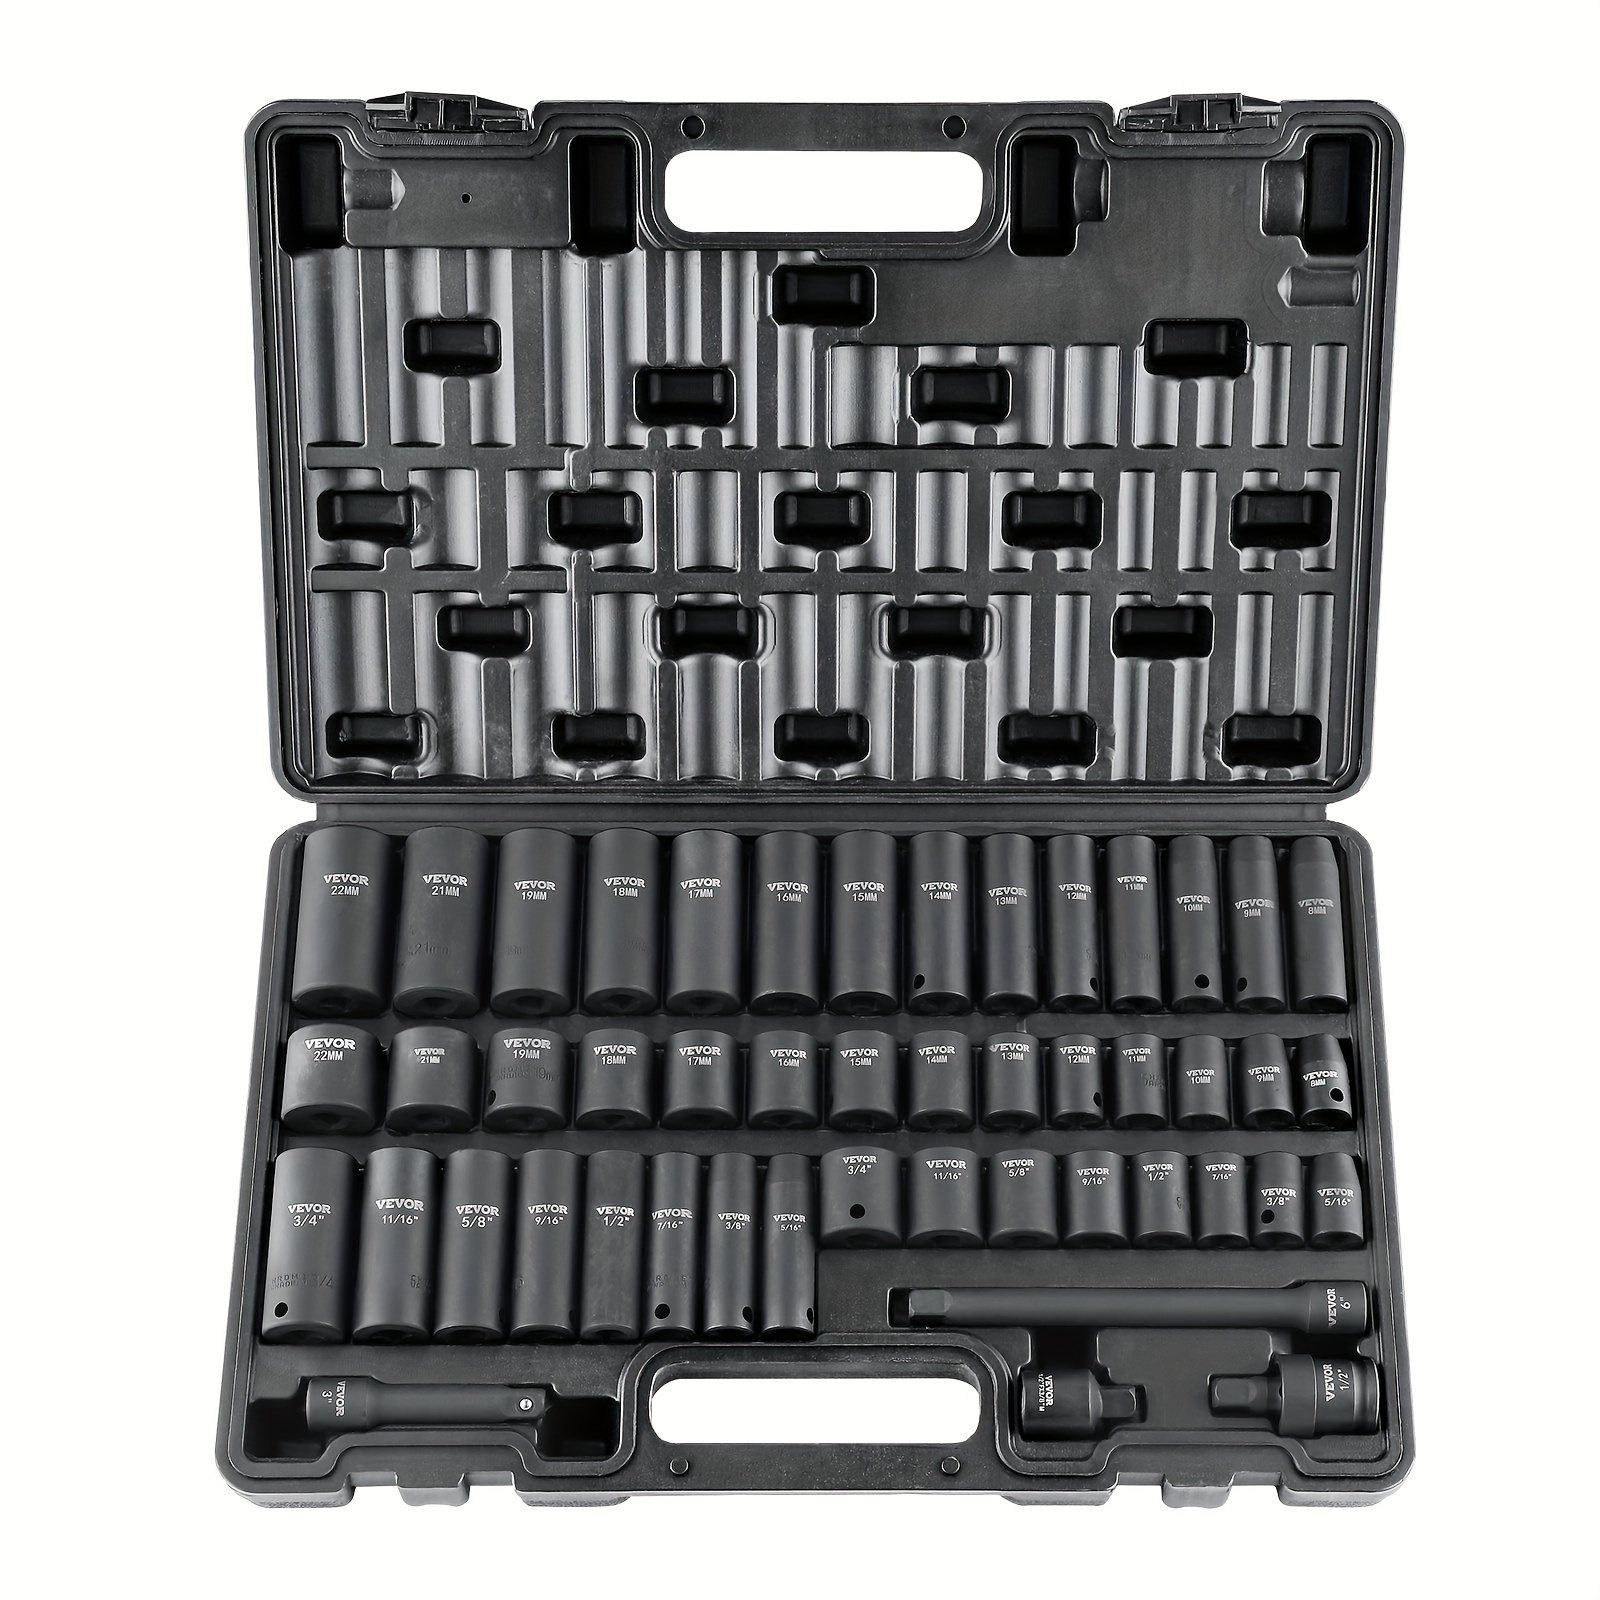 

48 Piece 3/8" Drive Impact Socket Set, Socket Set (5/16" -3/4") & Metric (8-22mm)6 Point Cr-v Drive Extension Bar Universal Joint & Power Drill Adapter Includes Storage Case